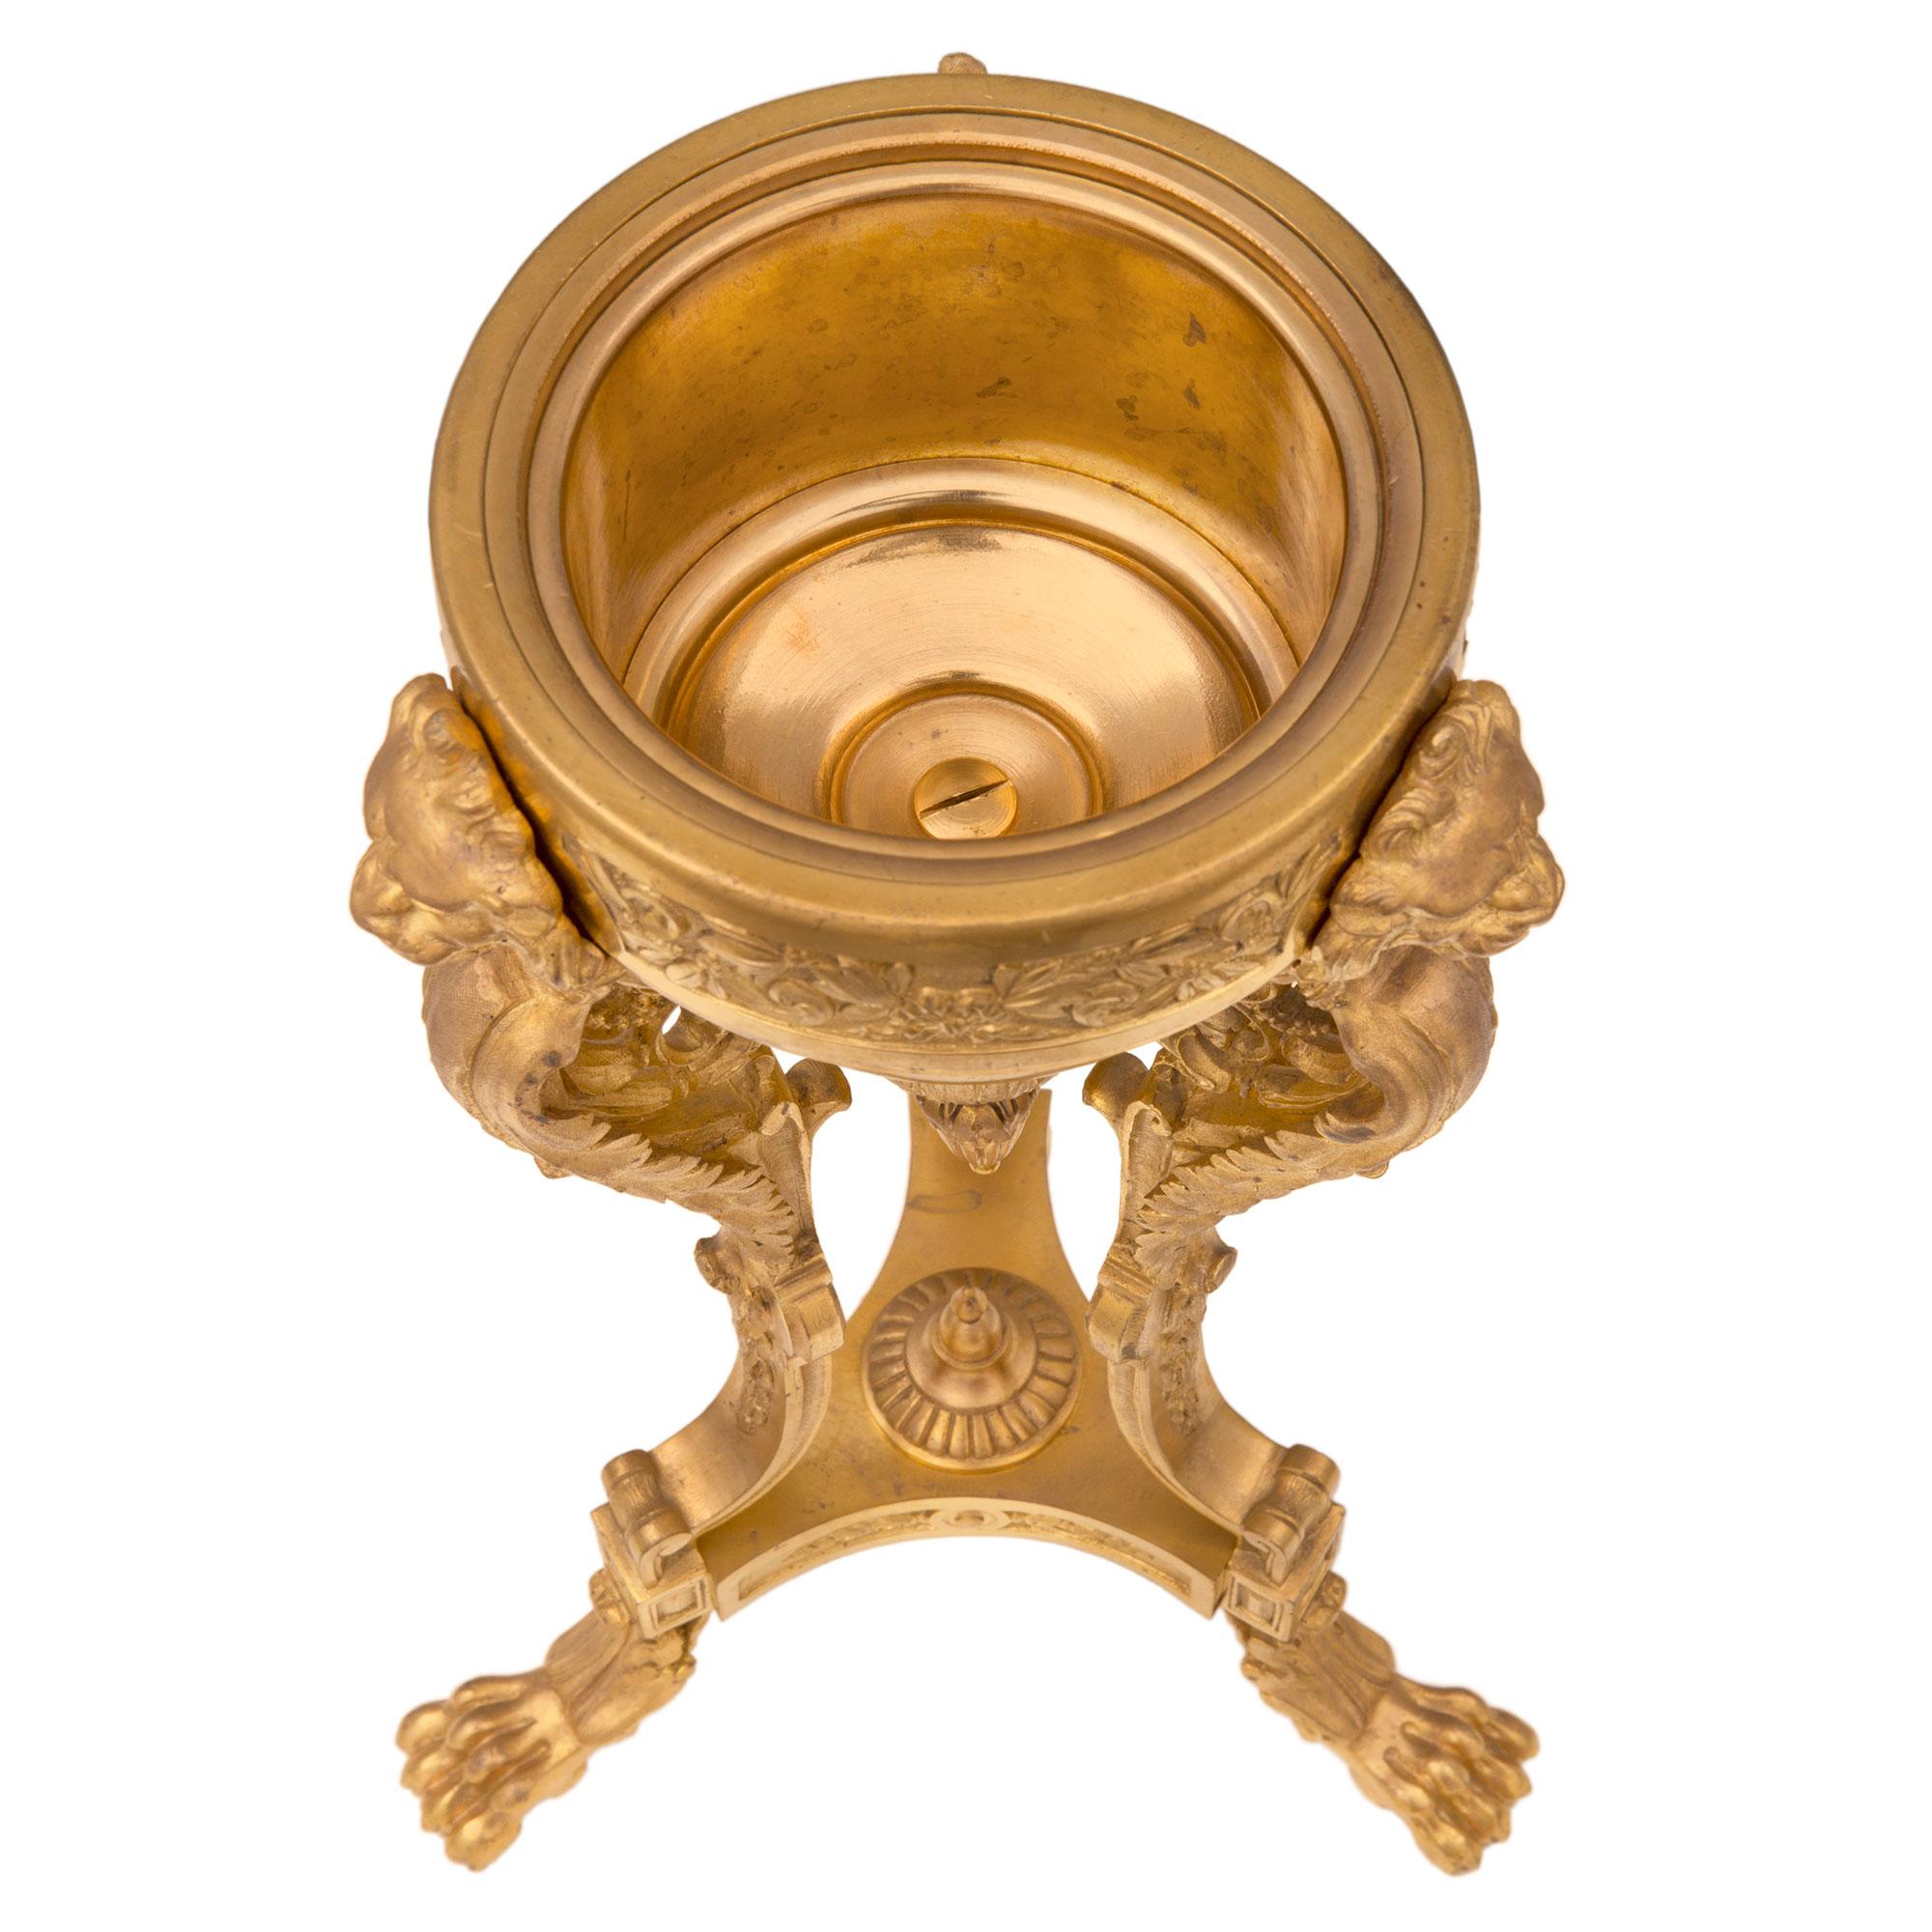 An impressive pair of French 19th century Neo-Classical st. ormolu and Vert de Patricia marble lidded urns. Each urn is raised by three handsome ormolu paw feet with fine acanthus leaves. Above each foot are block reserves centered by elegant